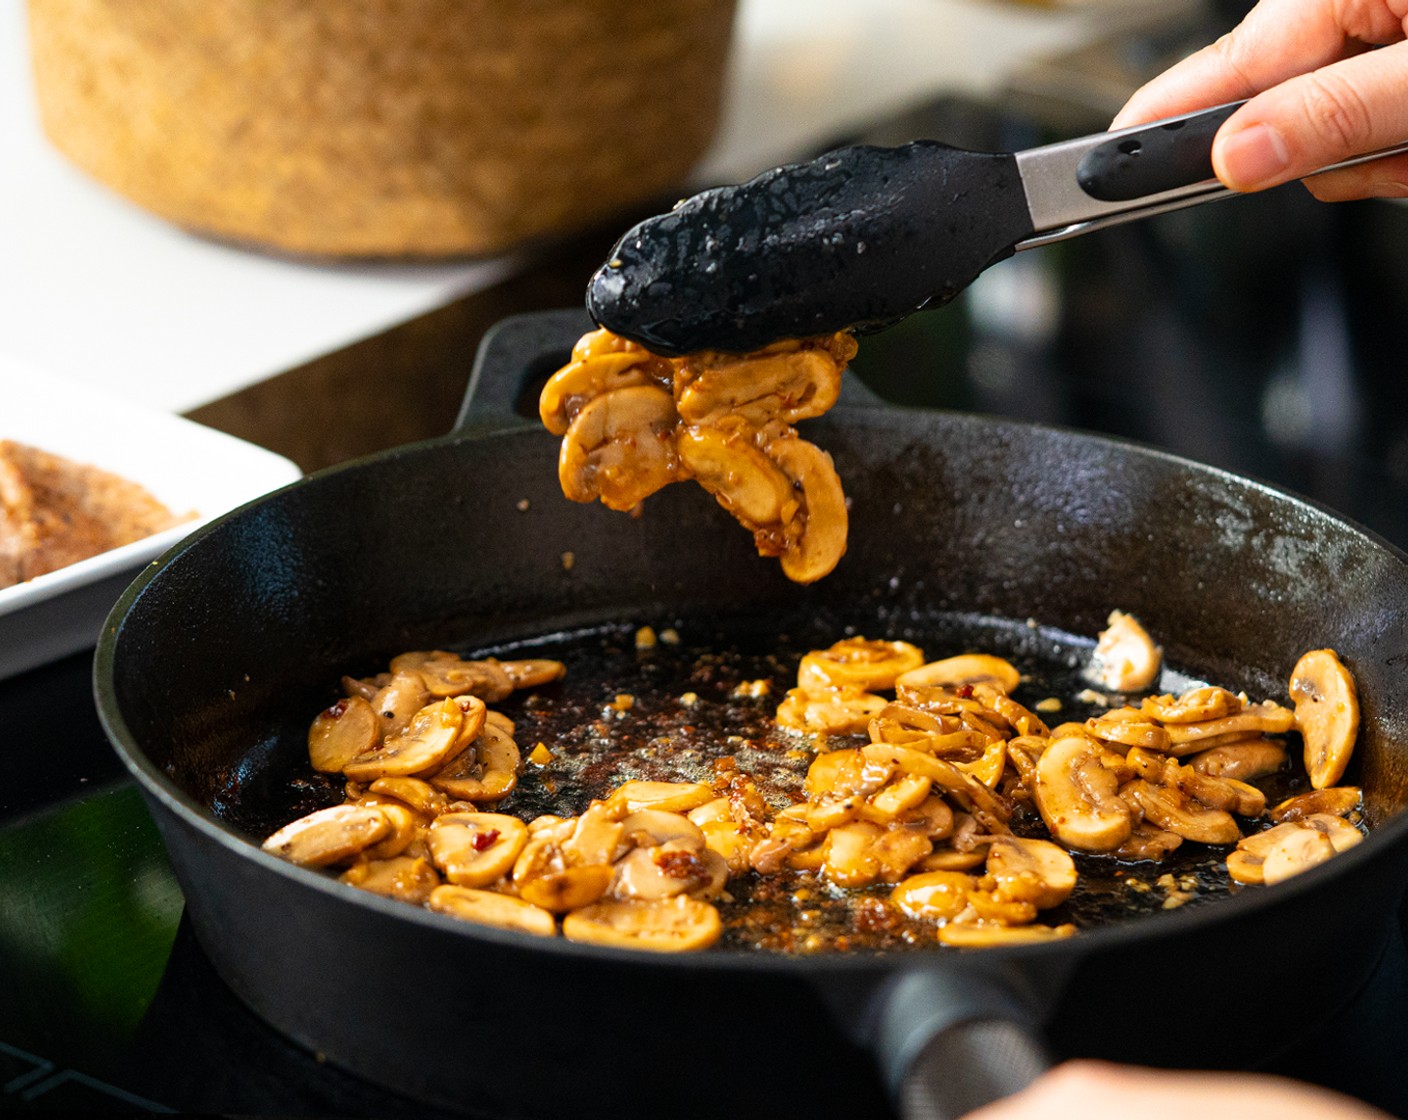 step 3 In the same skillet, add Unsalted Butter (1 Tbsp), once melted, cook the Garlic (2 cloves) until fragrant. Then add White Mushrooms (1 3/4 cups) and cook until soft, about 3 minutes.